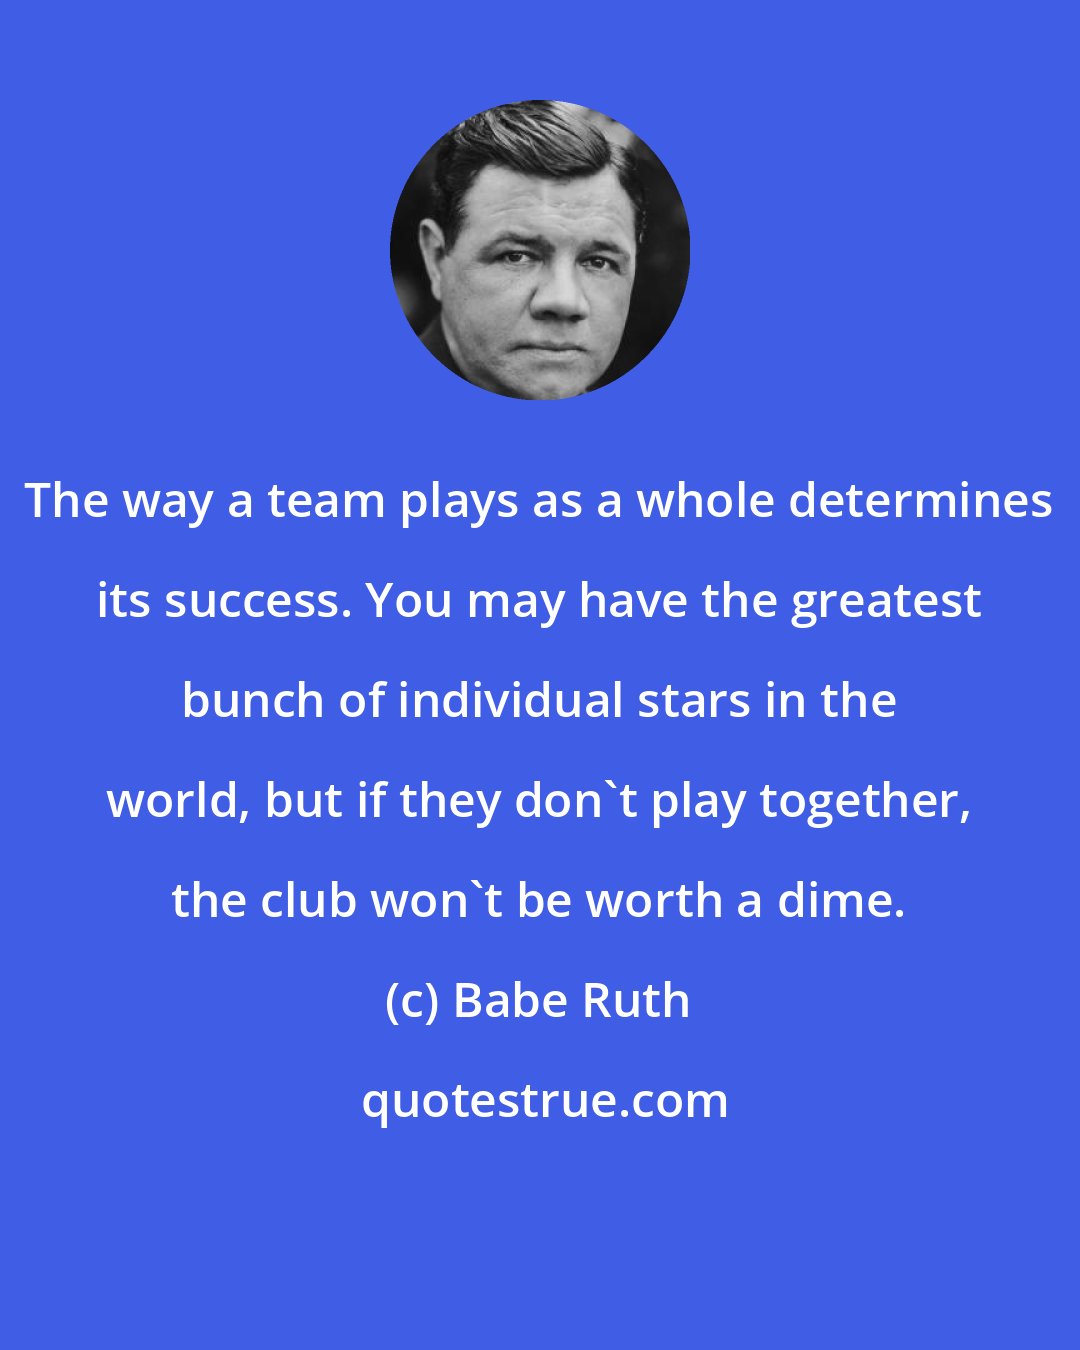 Babe Ruth: The way a team plays as a whole determines its success. You may have the greatest bunch of individual stars in the world, but if they don't play together, the club won't be worth a dime.